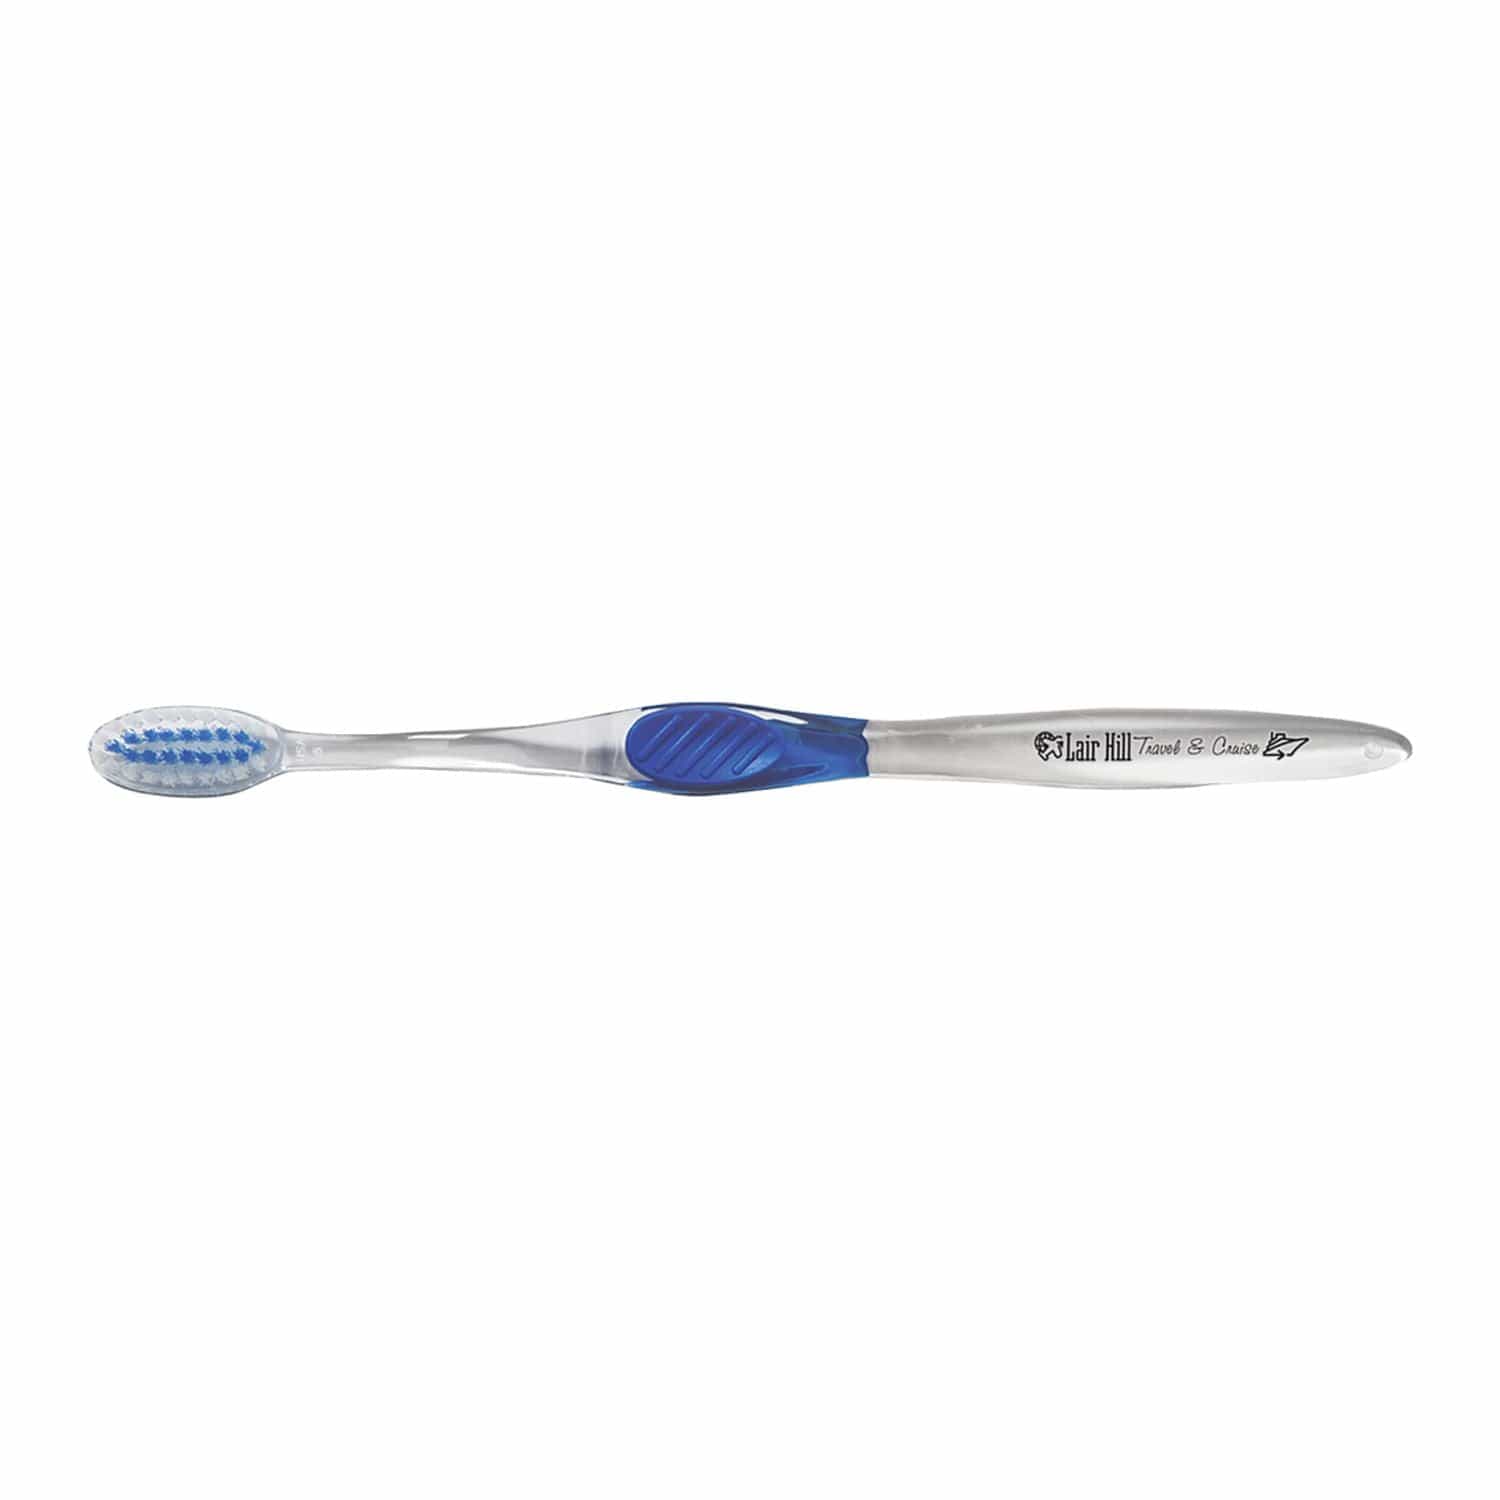 Threadfellows Accessories One Size / Blue Accent Toothbrush